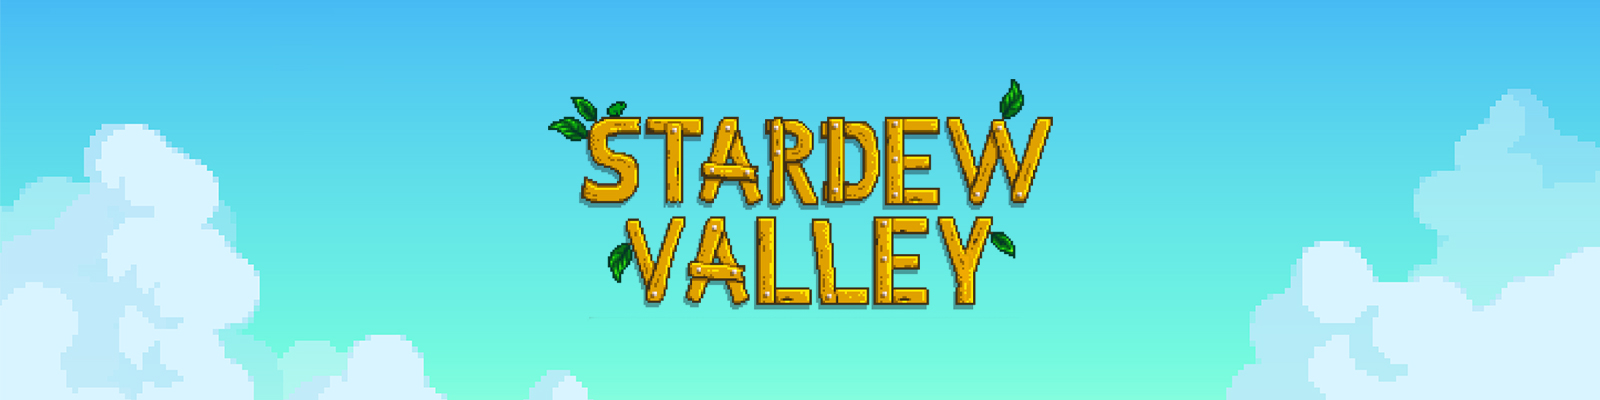 Official Stardew Valley Merchandise Collection